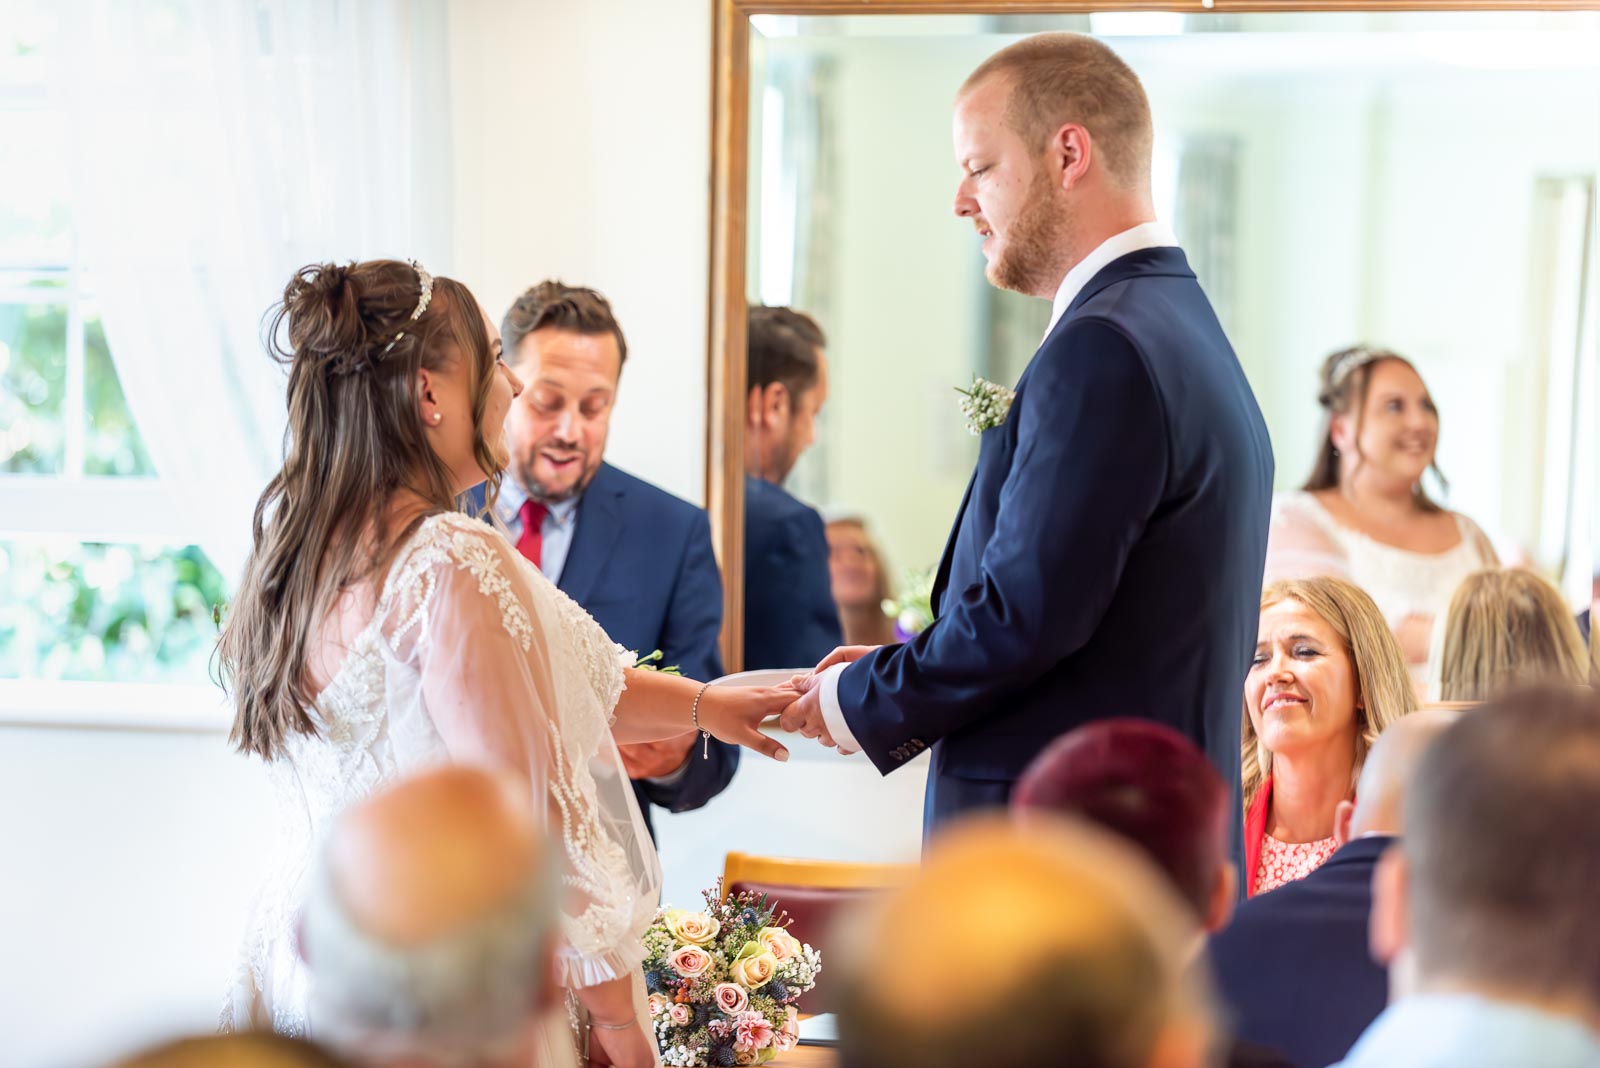 Catherine shares marriage vows with Steve at Haywards Heath Town Hall 